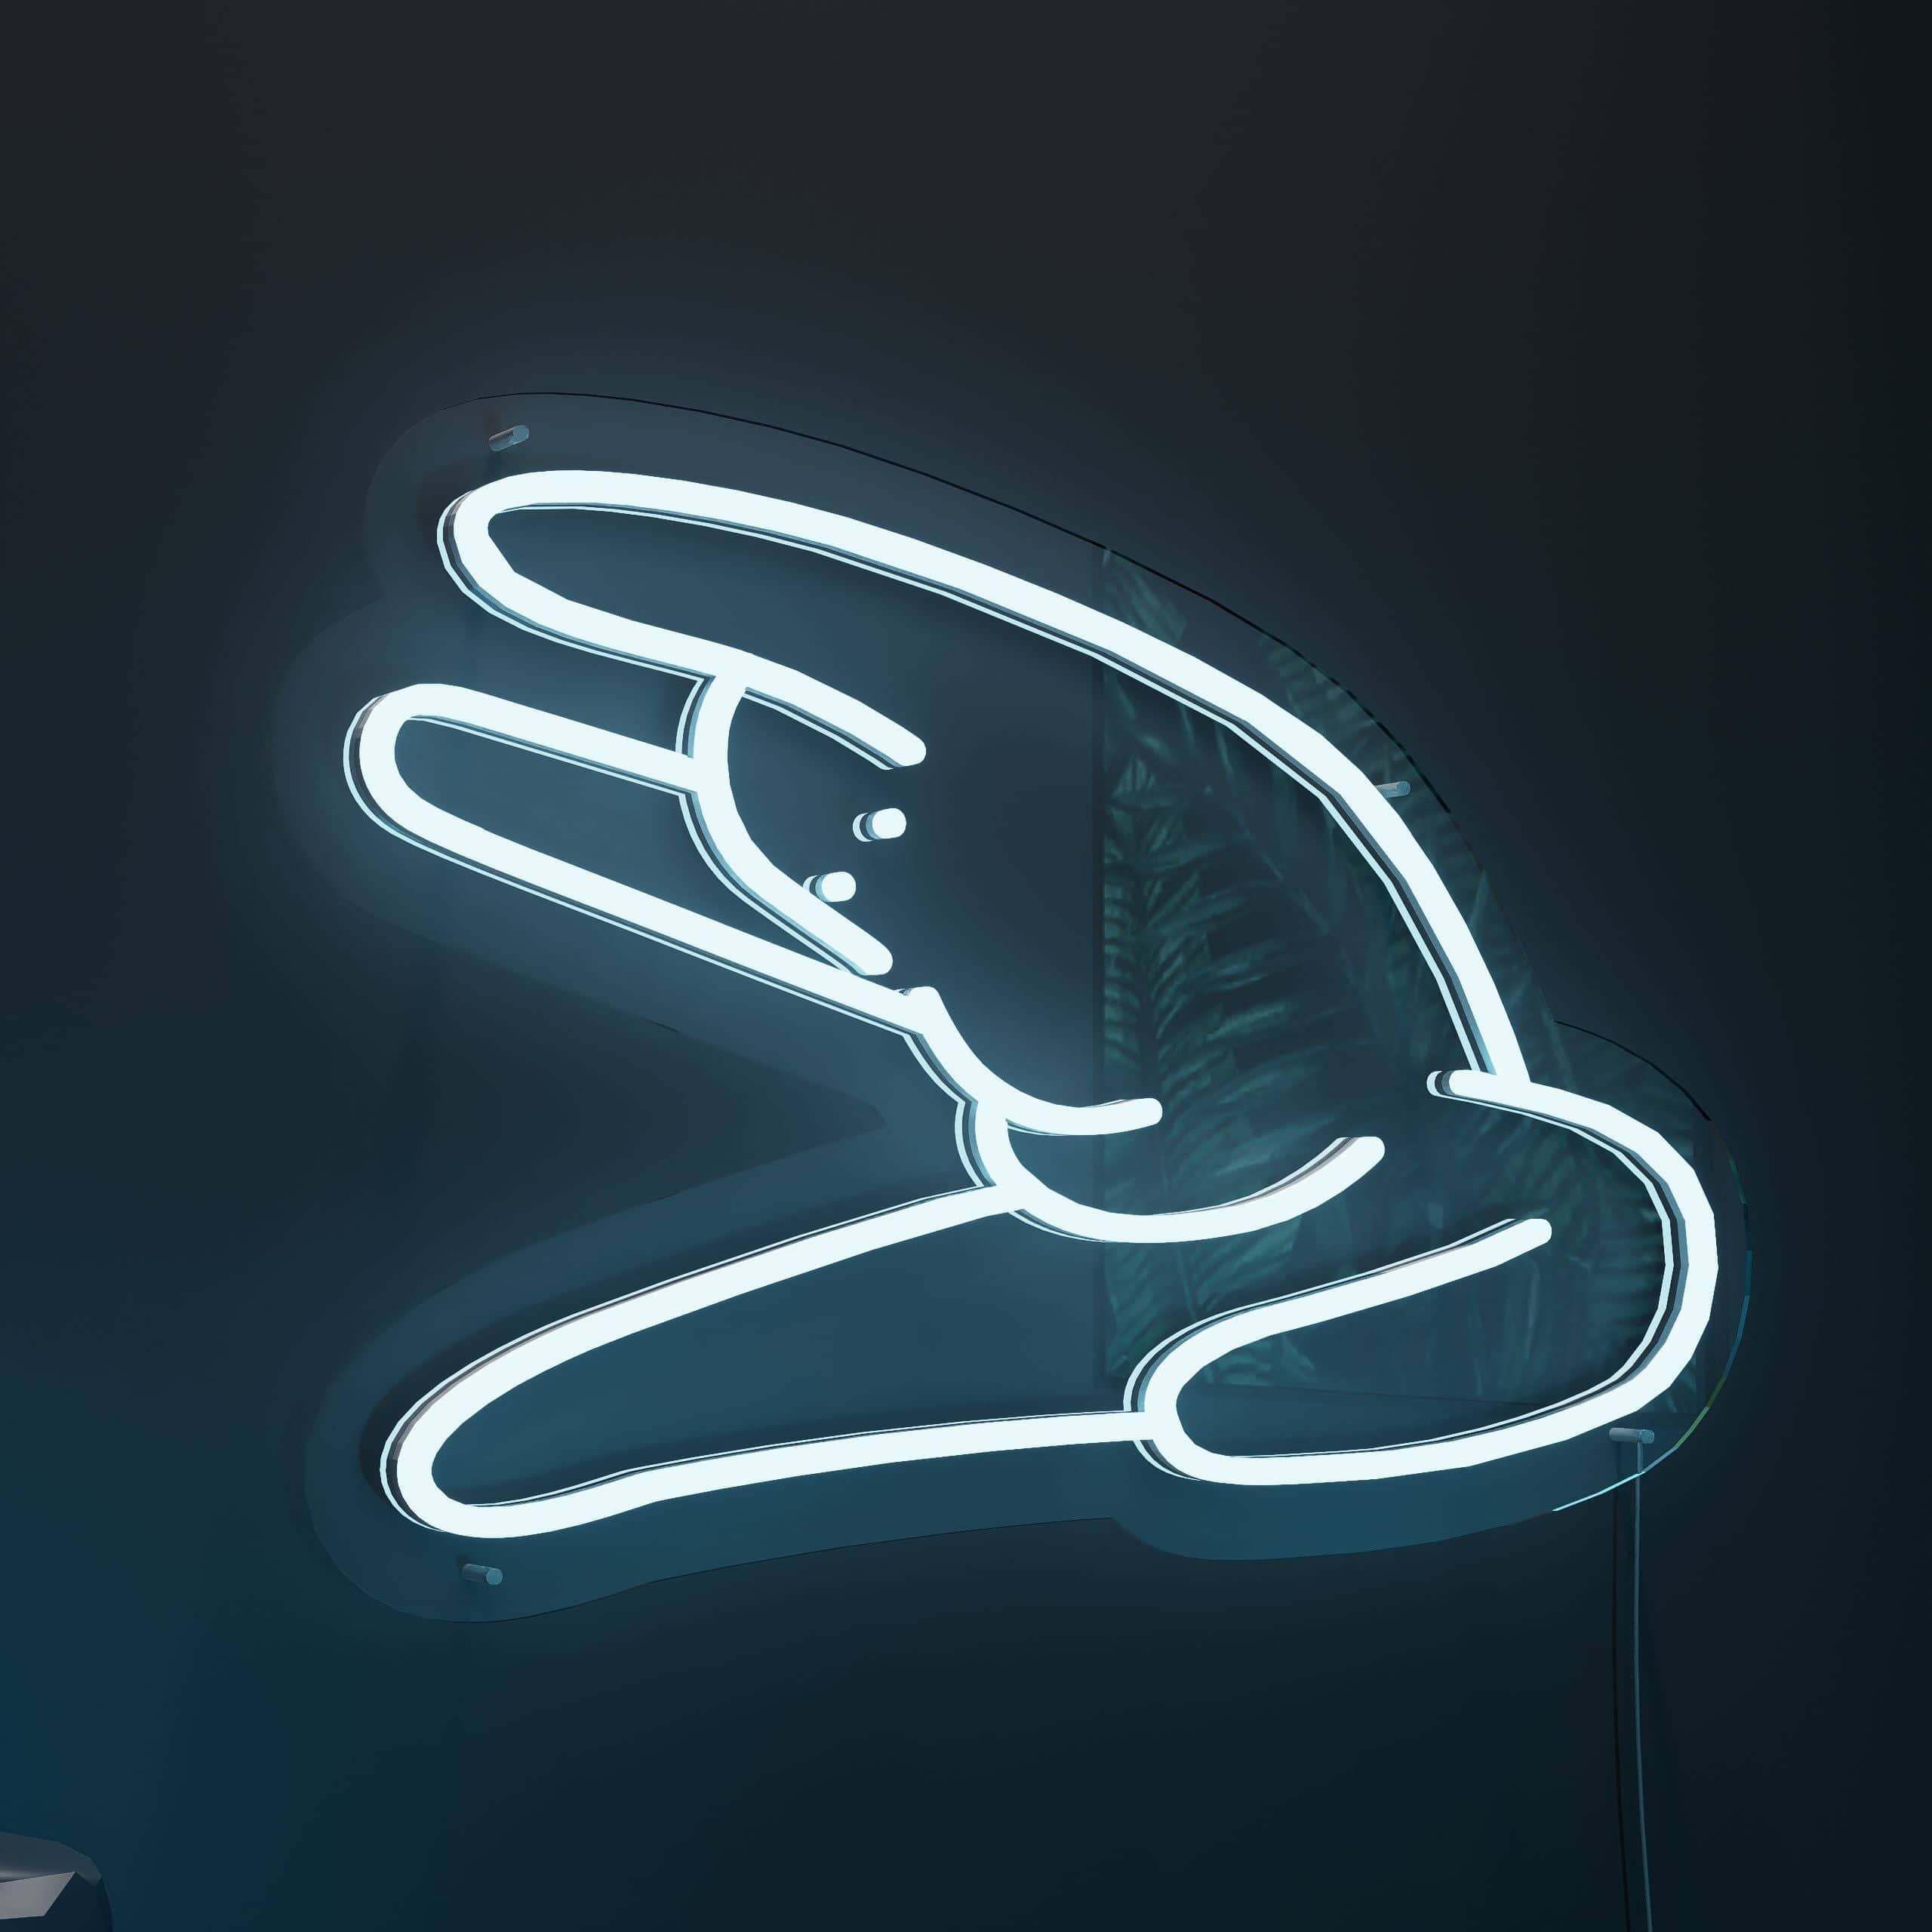 Funny neon sign adds a playful touch to evenings